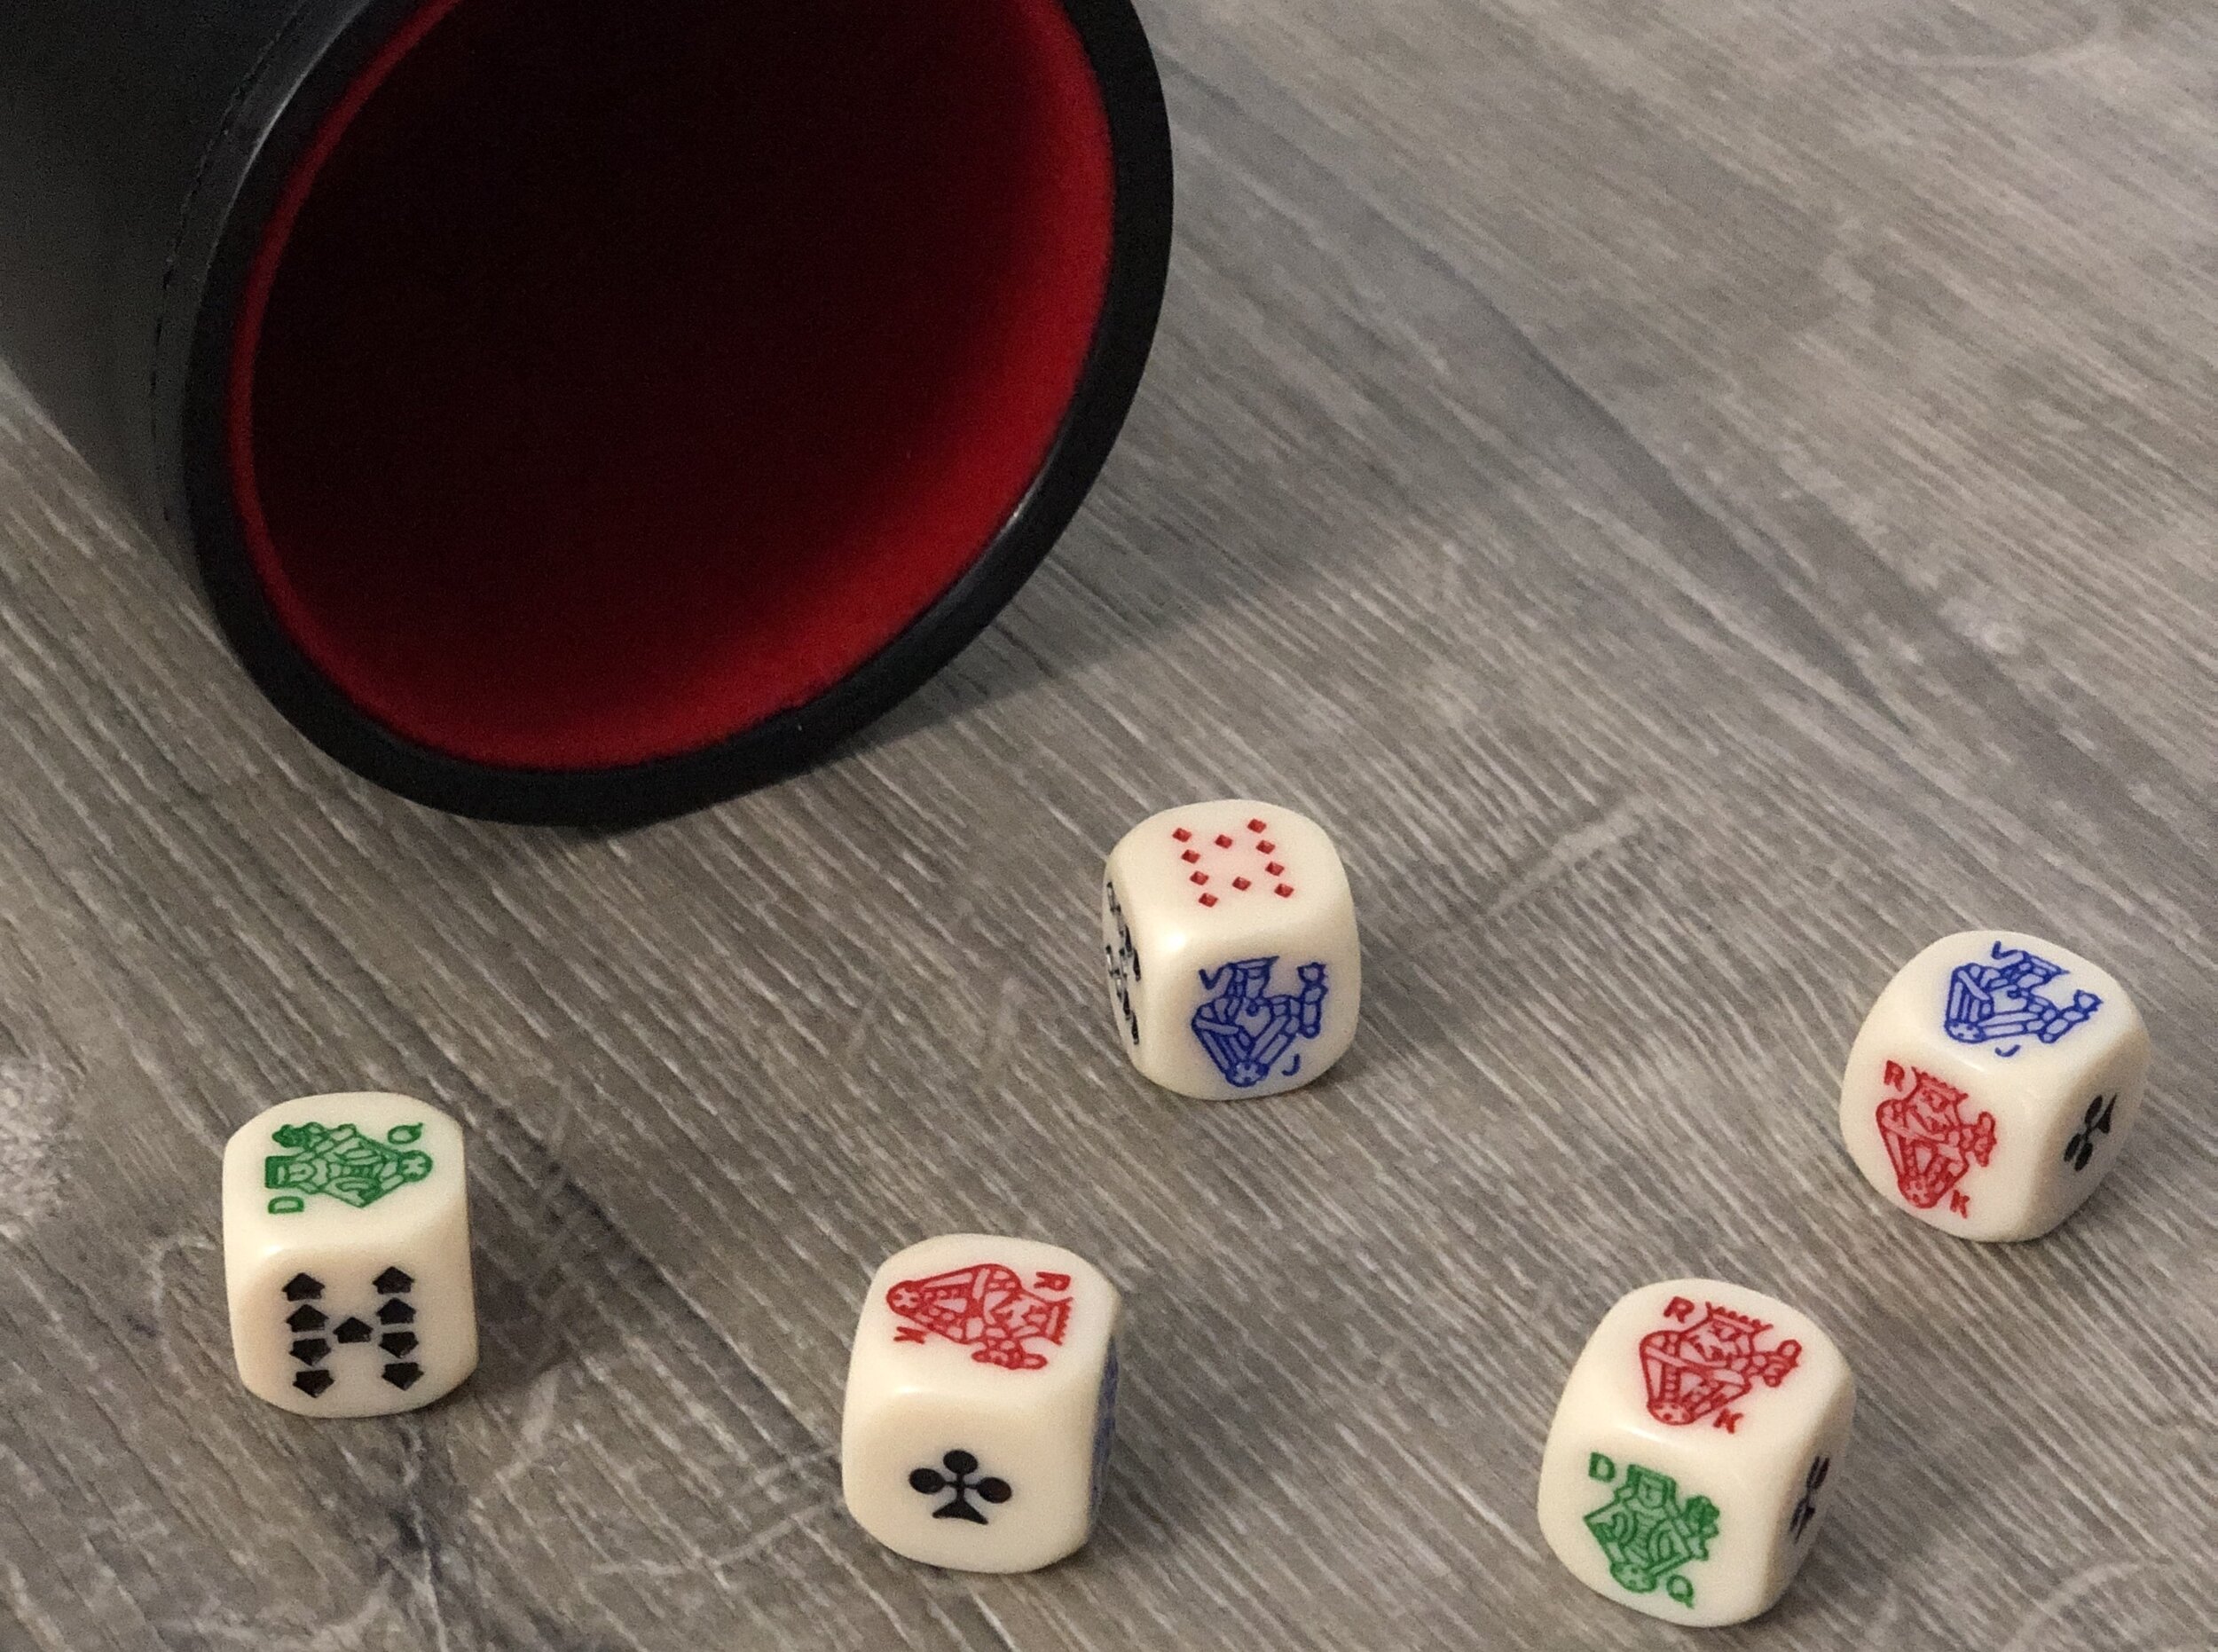 How to Play Poker Dice in a Social Setting?